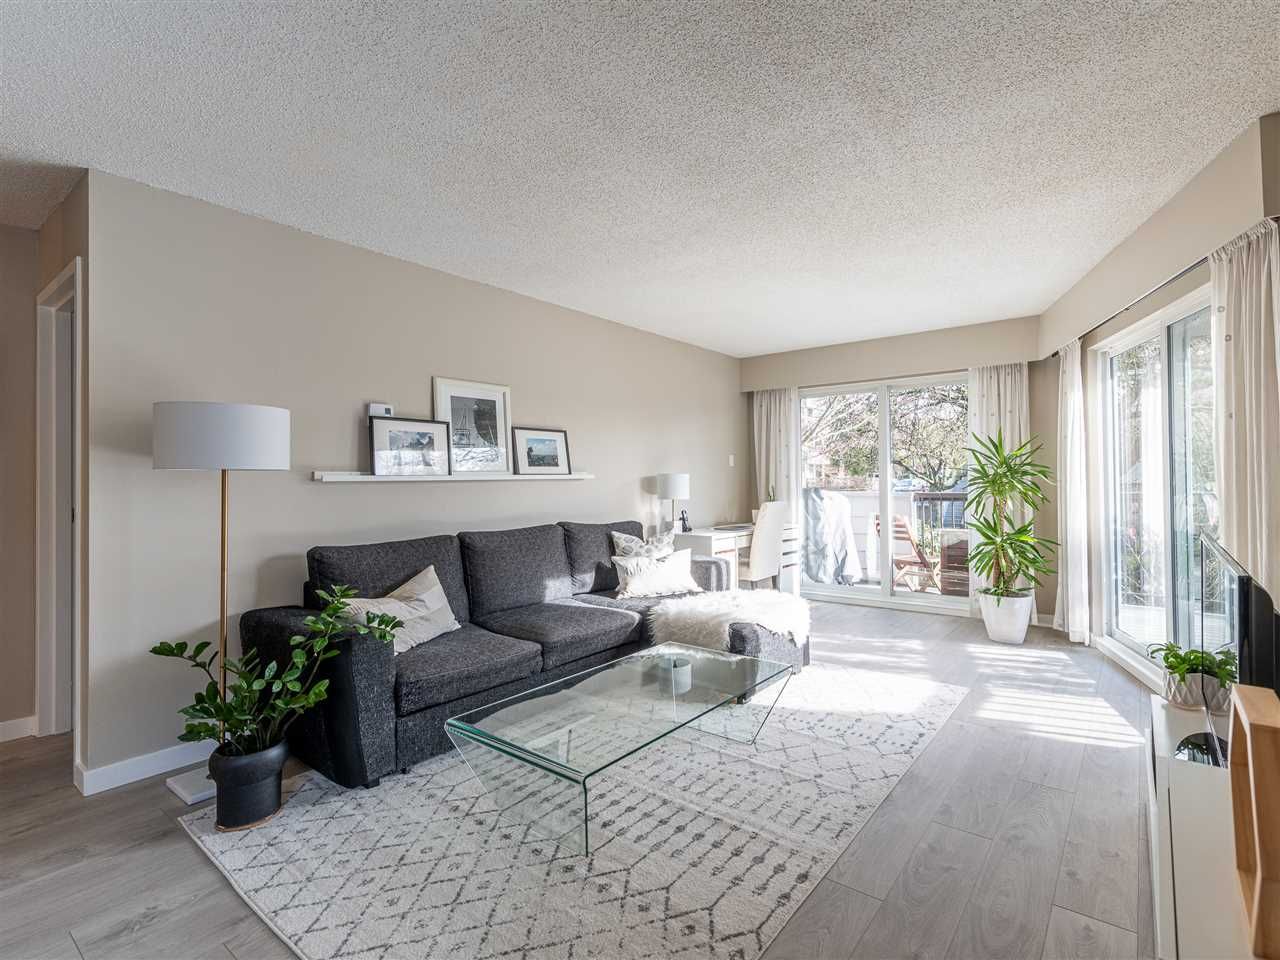 Main Photo: 212 3353 HEATHER Street in Vancouver: Cambie Condo for sale (Vancouver West)  : MLS®# R2432792